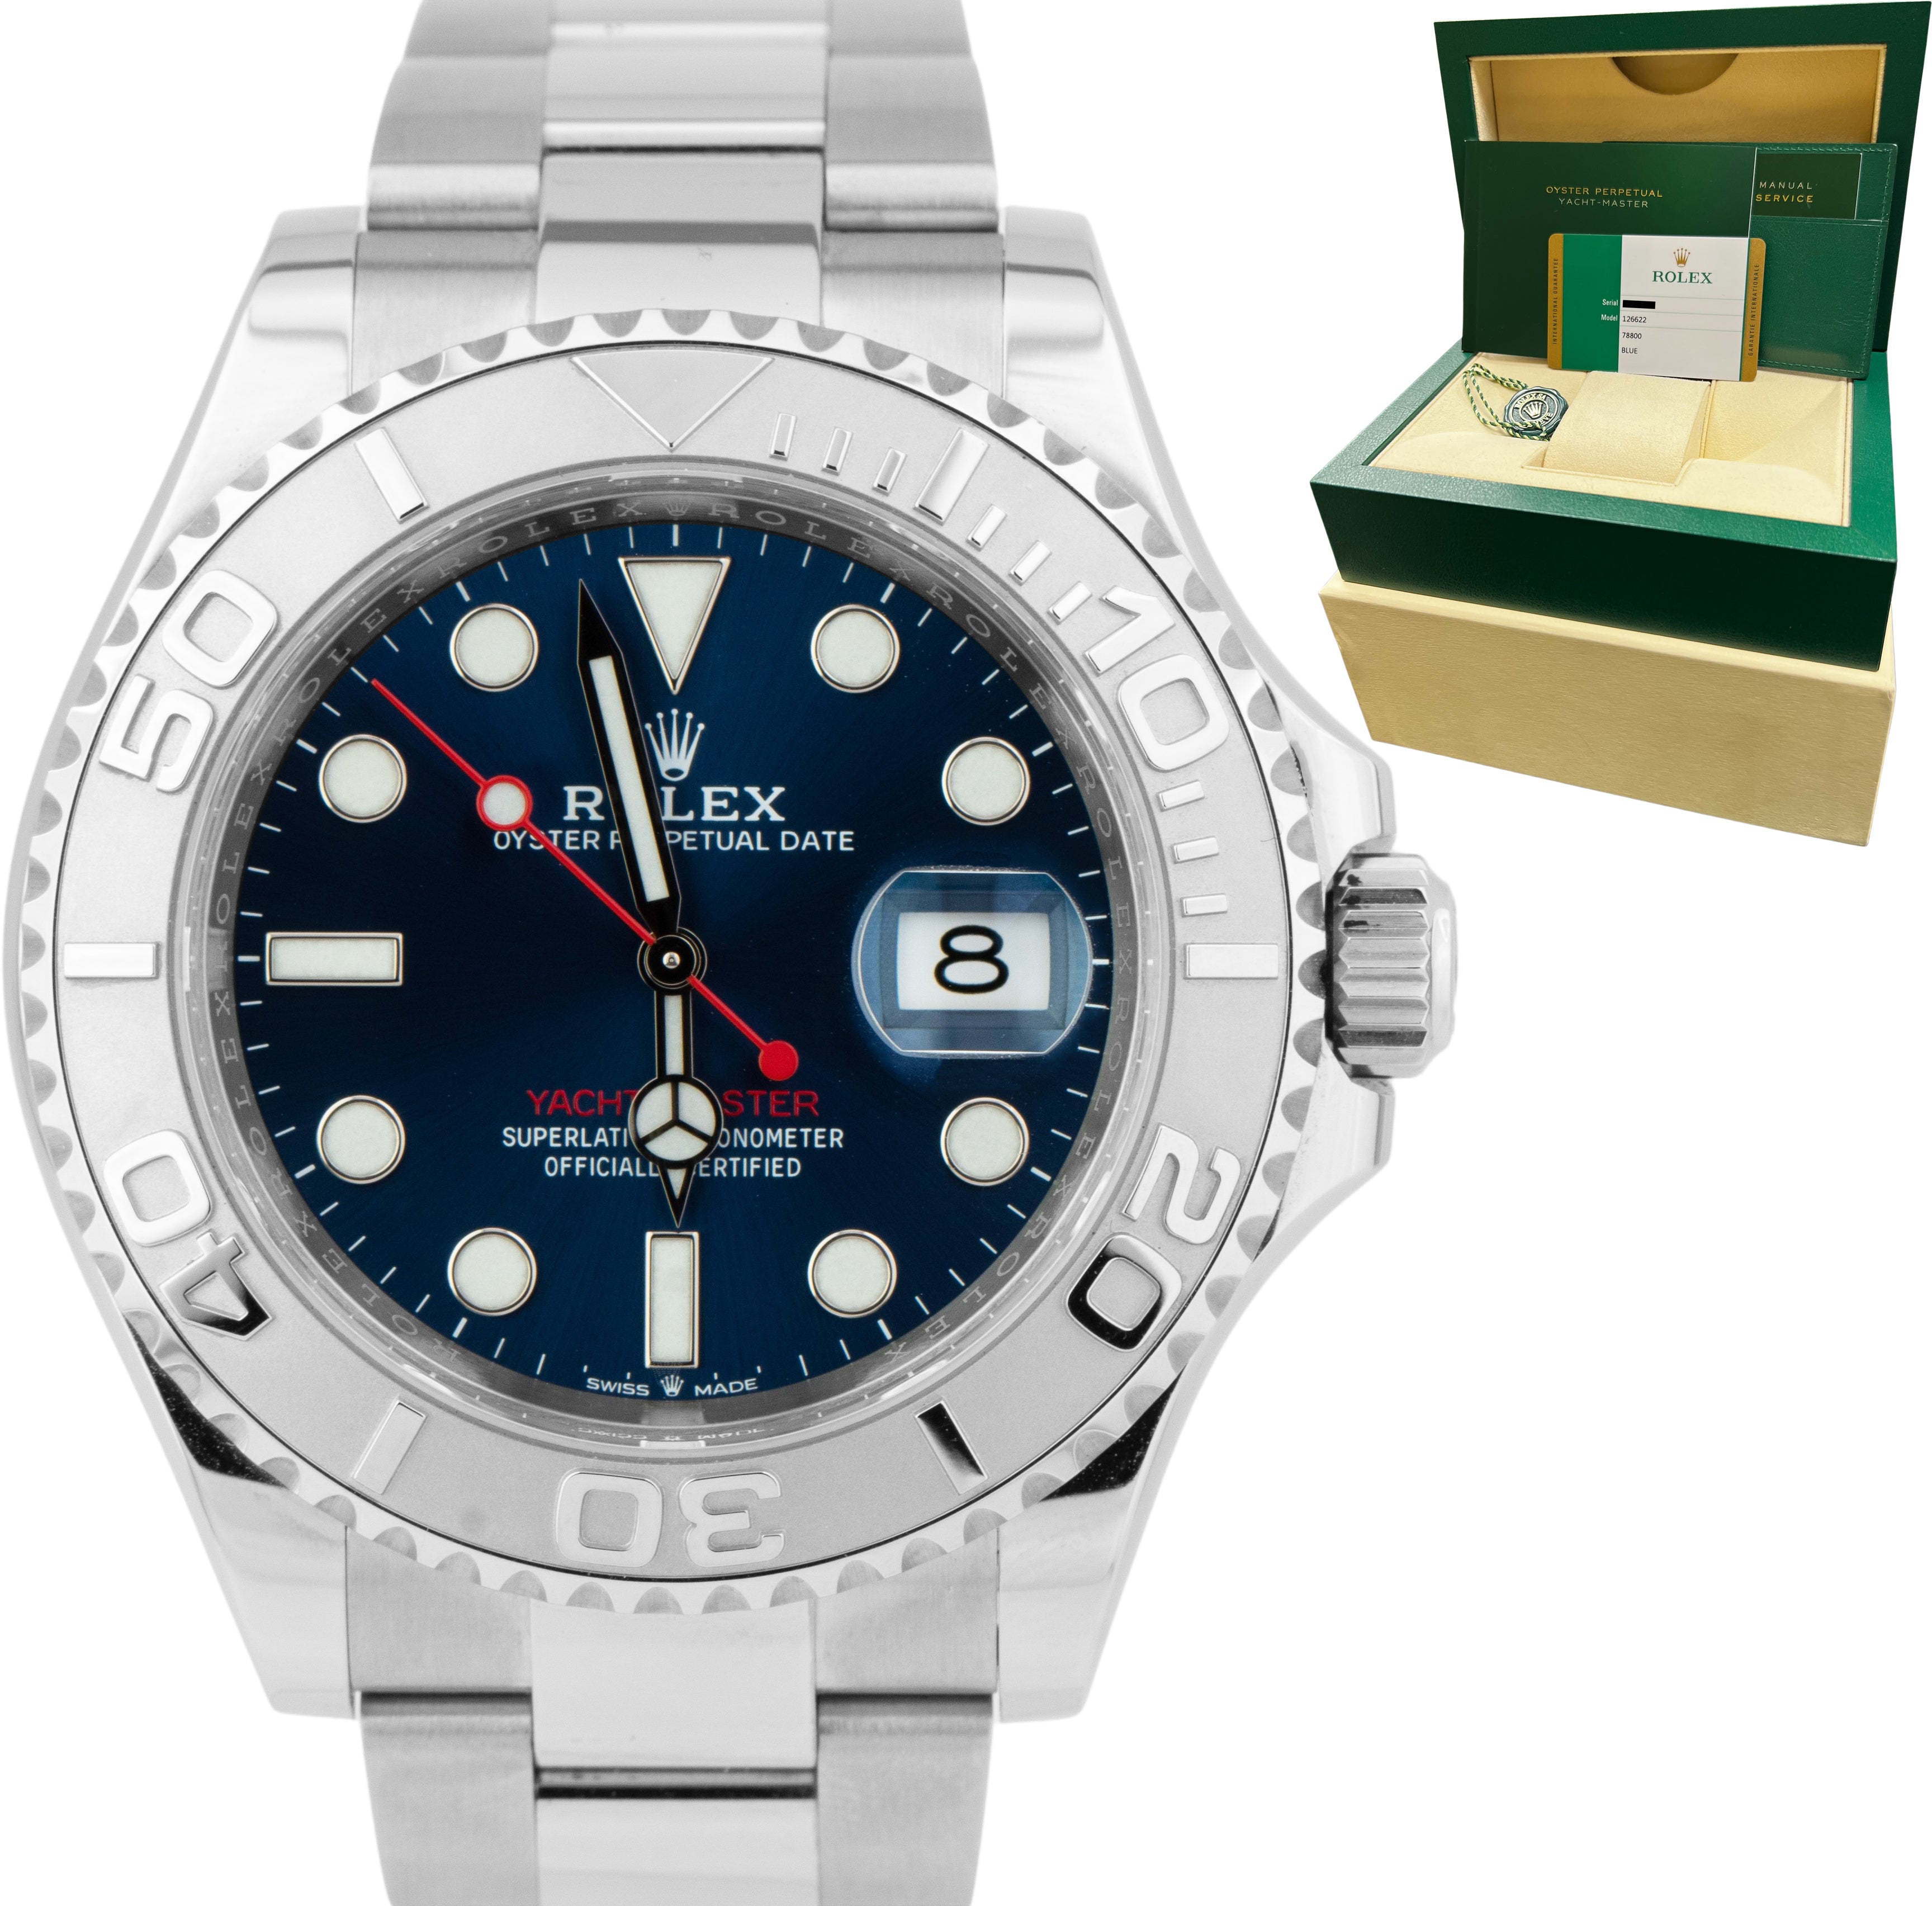 Rolex Yacht-Master 40mm Blue Stainless Steel Oyster Dive Watch 126622 BOX CARD